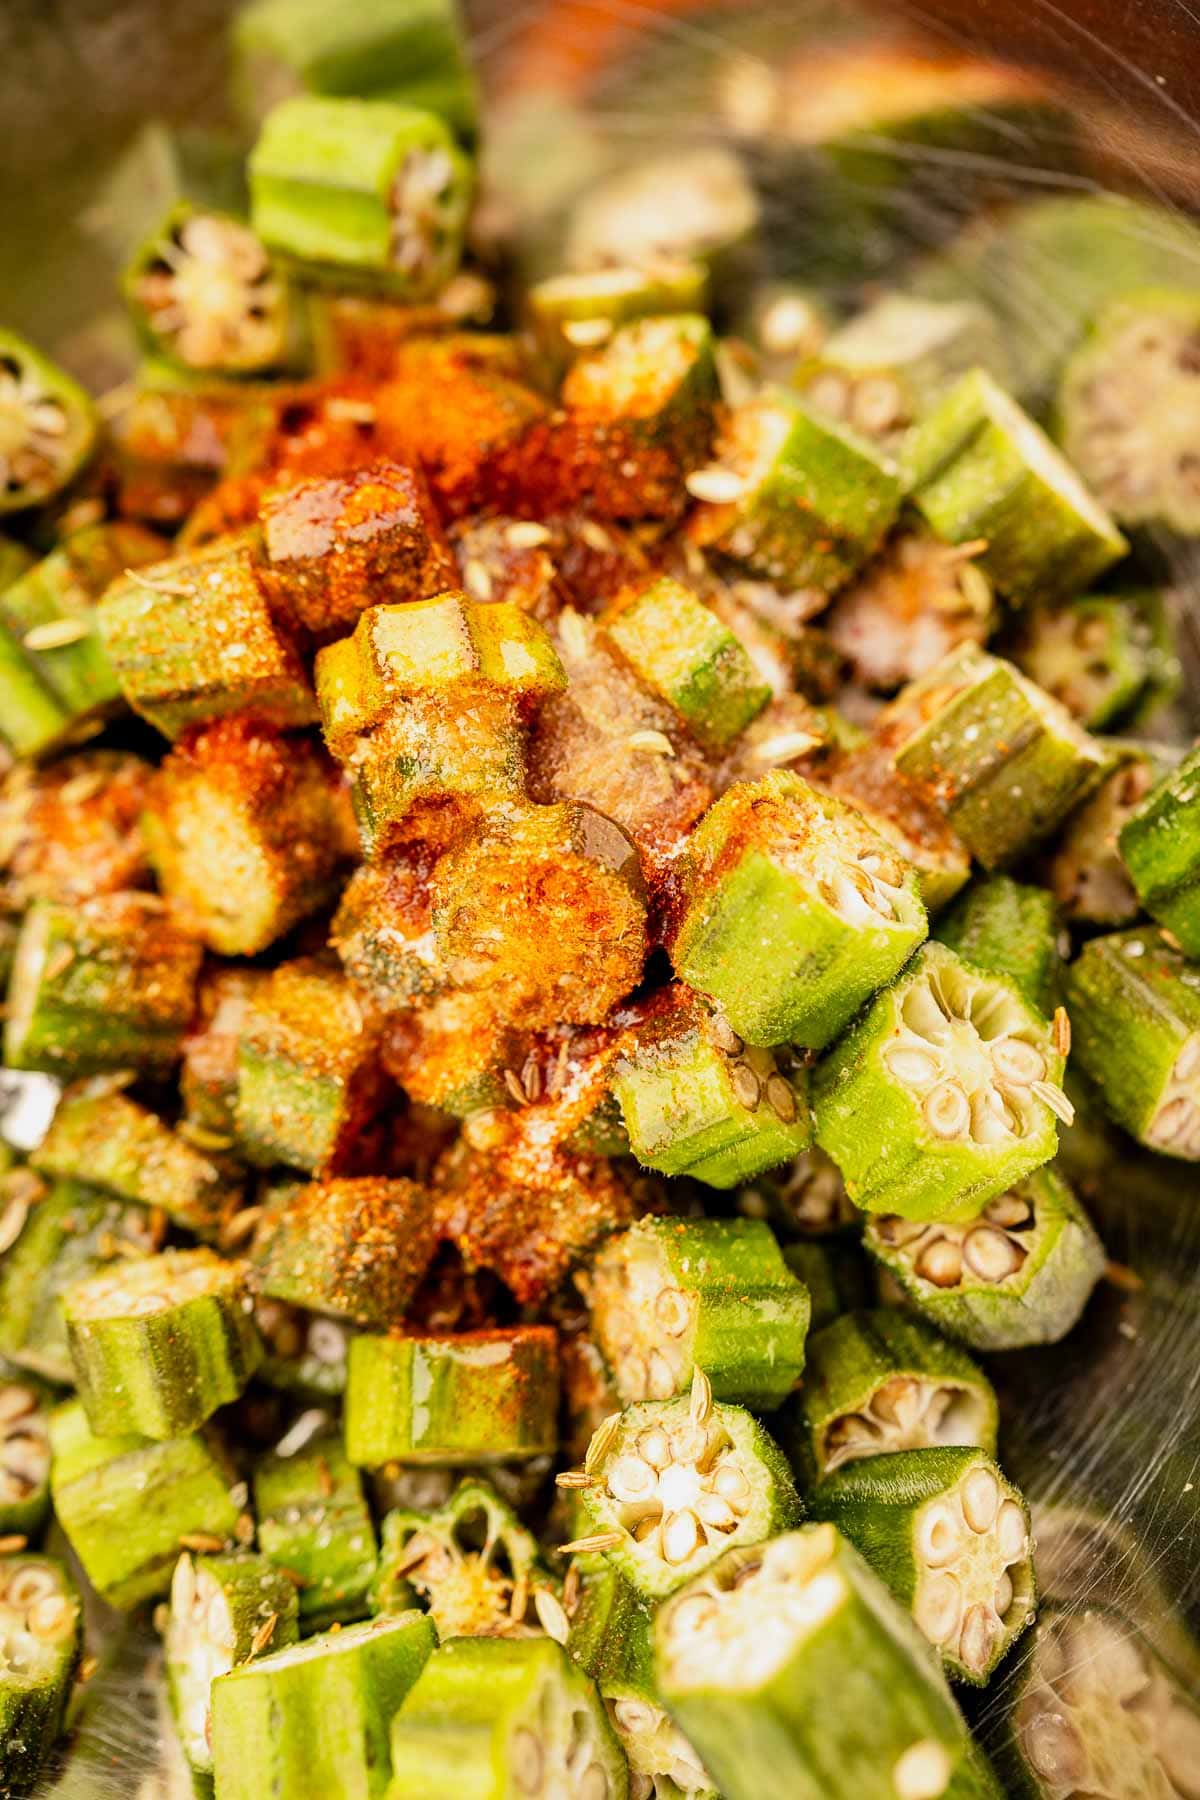 Chopped okra recipe seasoned with spices in a bowl.